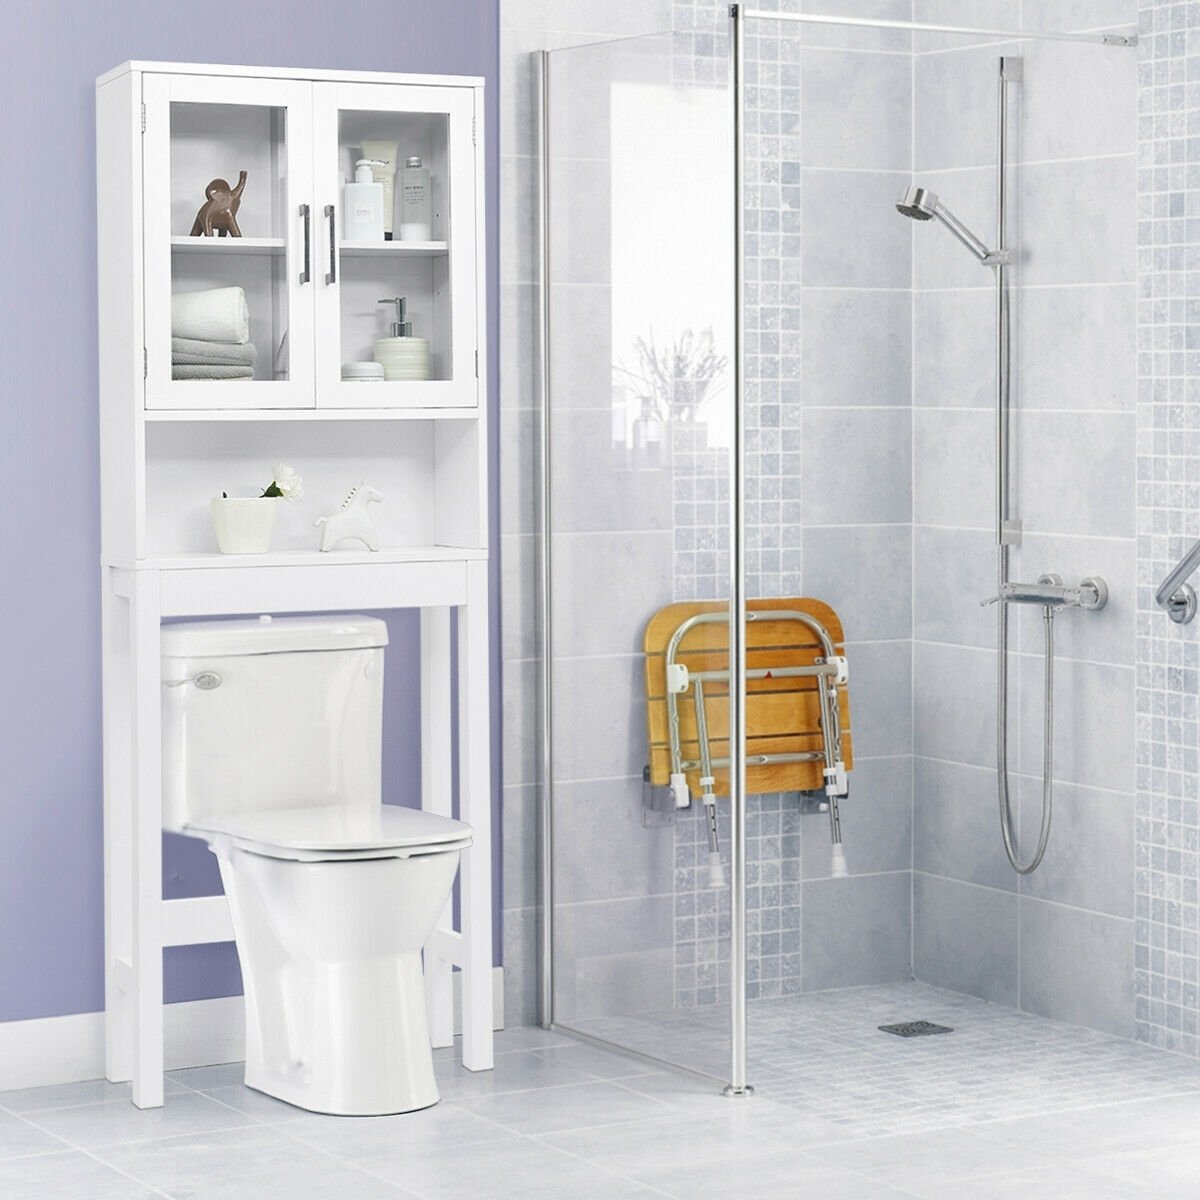 Over the Toilet Storage Cabinet Bathroom Space Saver with Tempered Glass Door, White